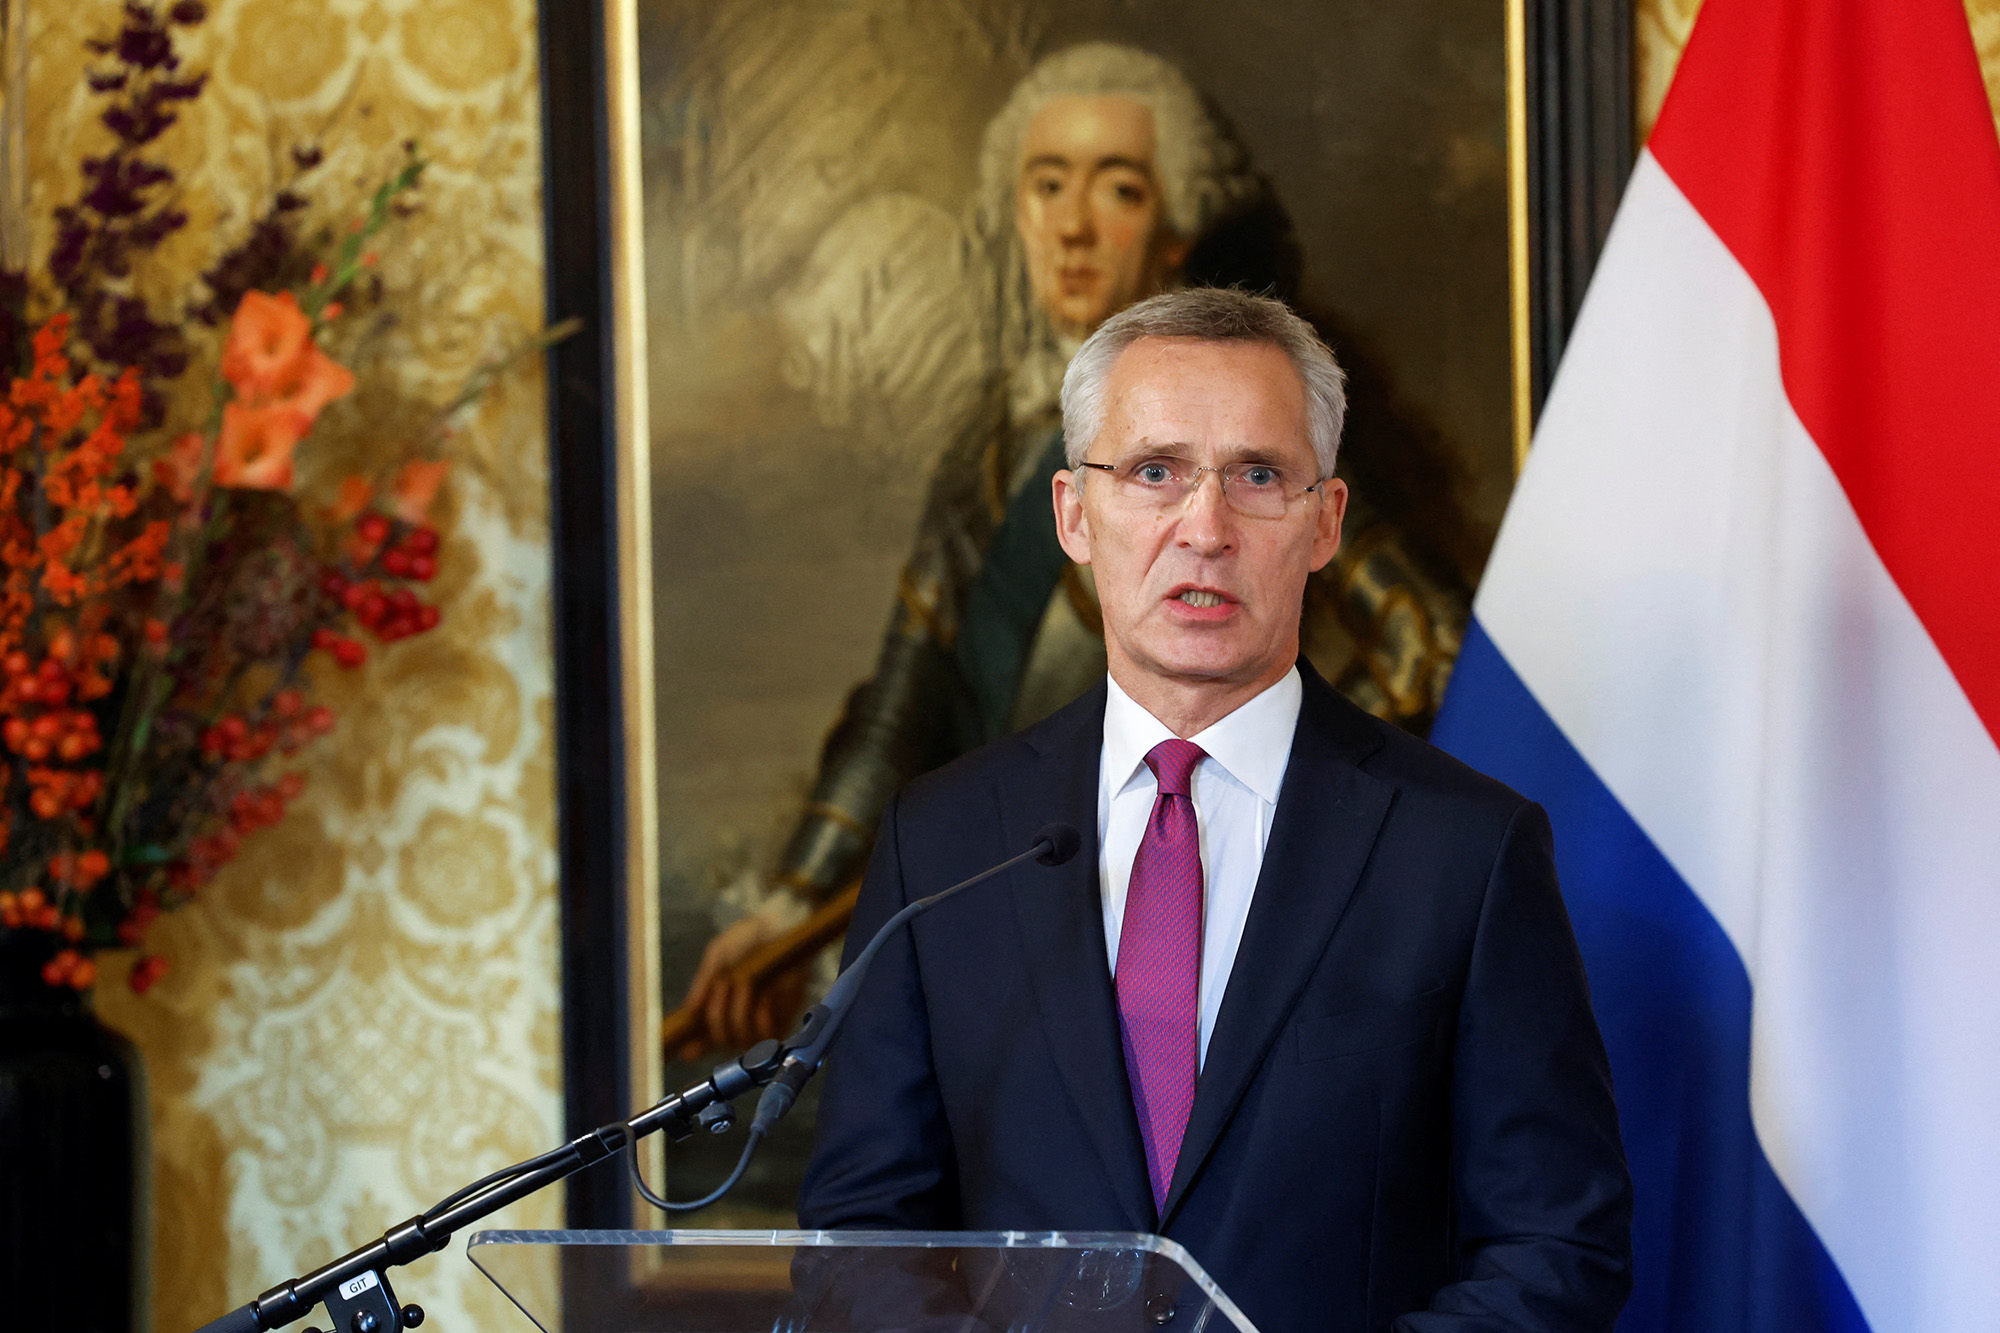 NATO Secretary General Jens Stoltenberg speaks during a joint news conference in The Hague, Netherlands, on November 14.